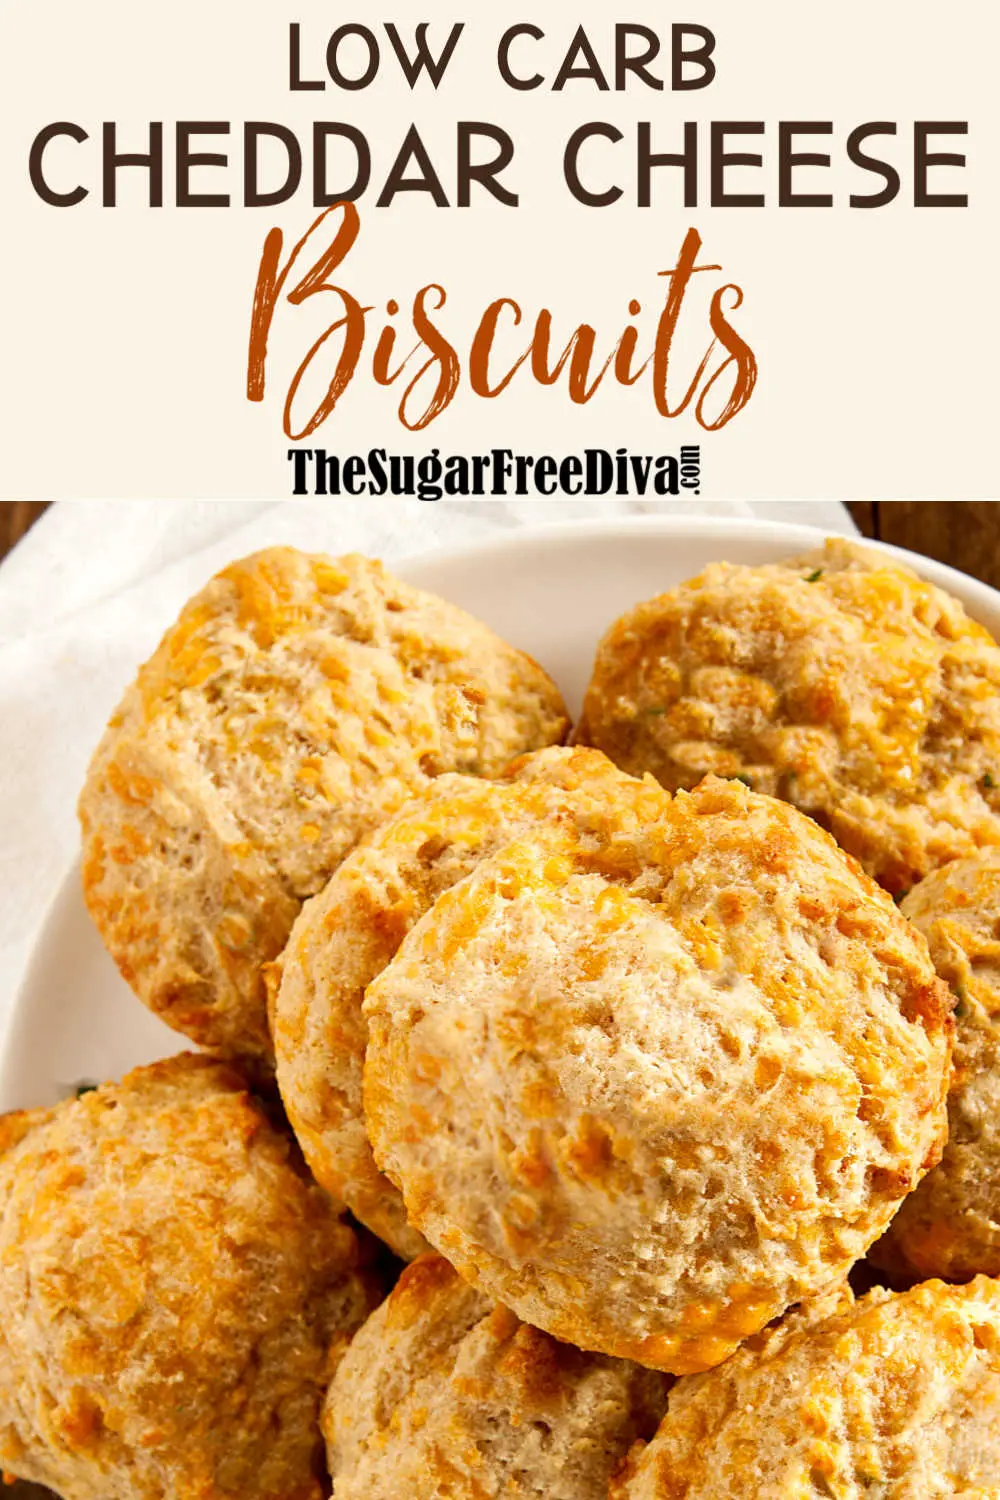 Low Carb Cheddar Cheese Biscuits